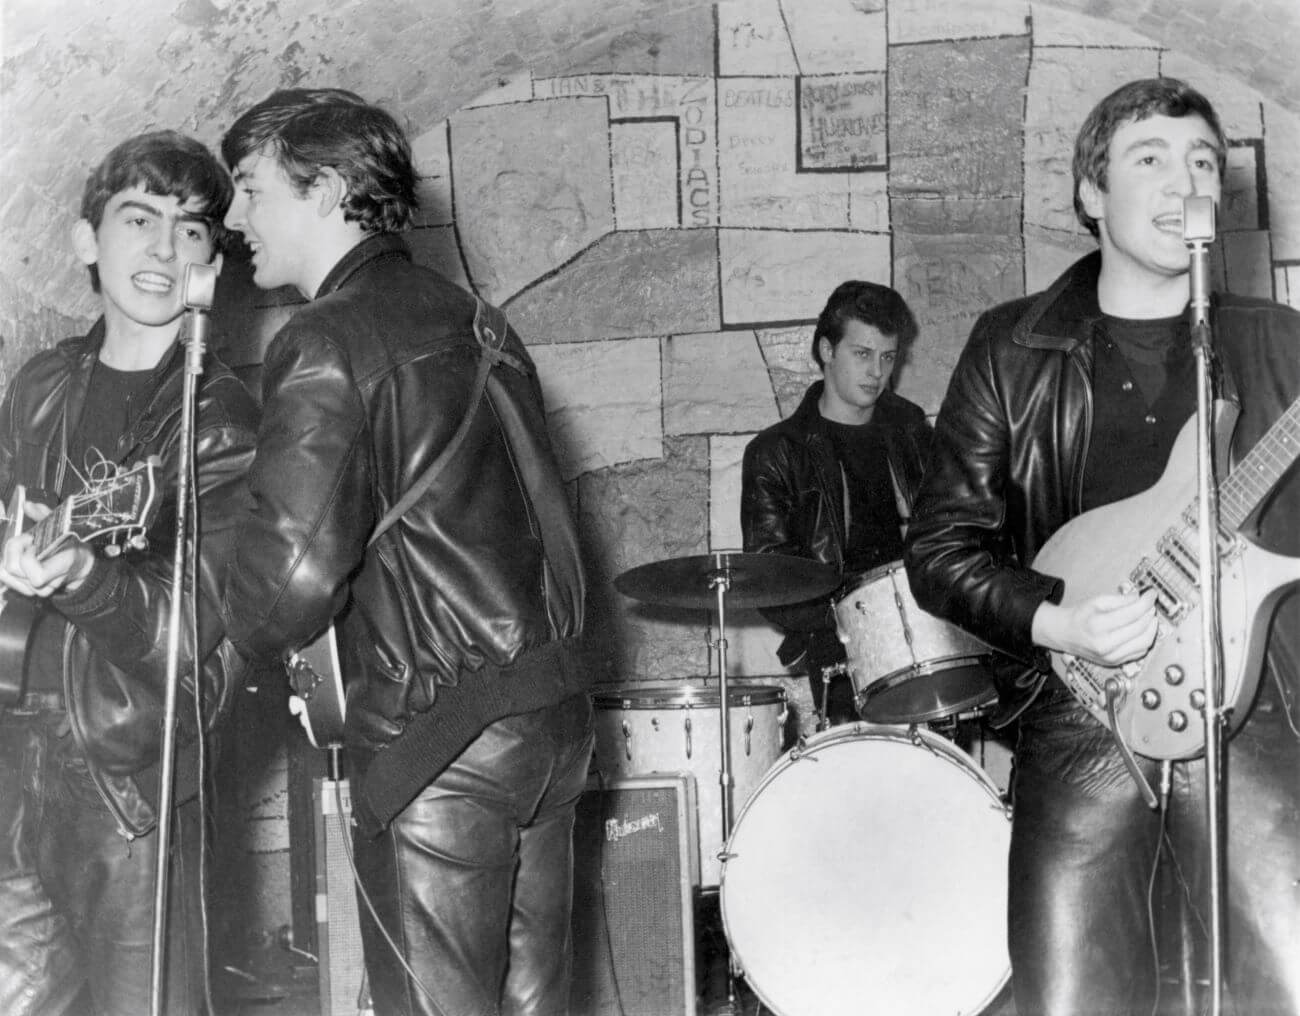 A black and white picture of George Harrison, Paul McCartney, and John Lennon singing into microphones while Pete Best plays the drums.